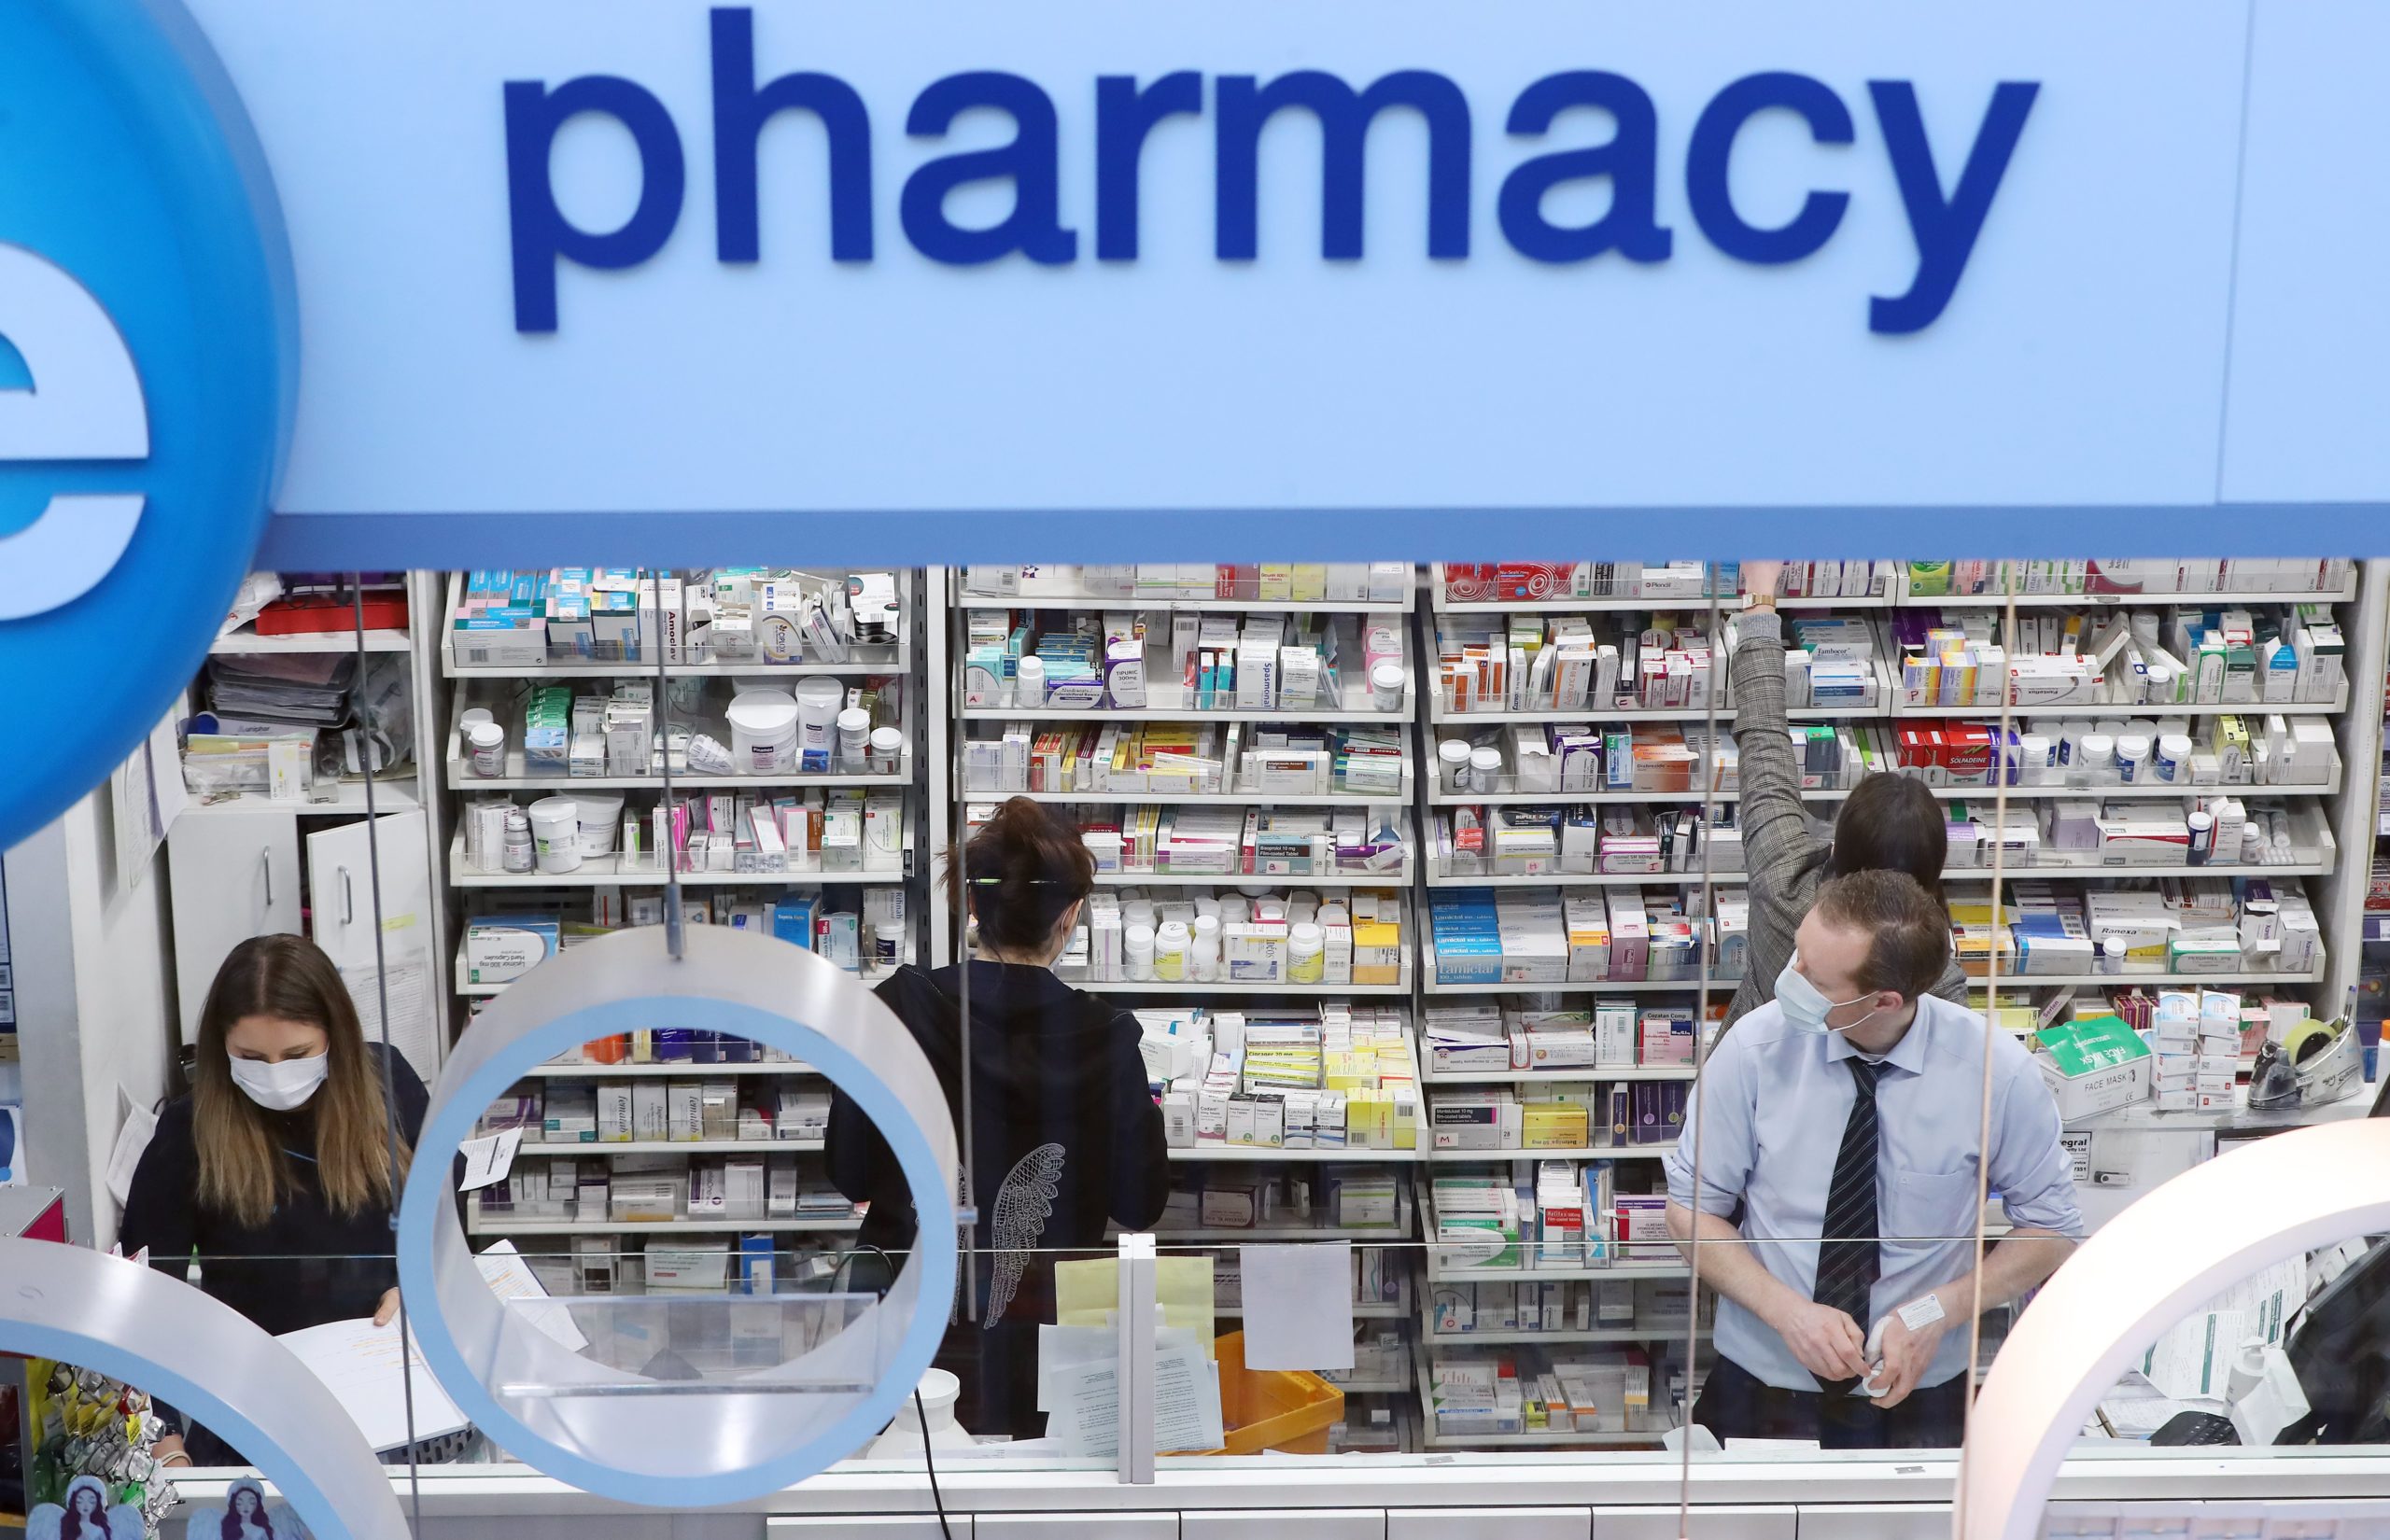 Pharmacy staff should wear masks if they cannot keep two metres away from colleagues, new guidance says - The Pharmaceutical Journal